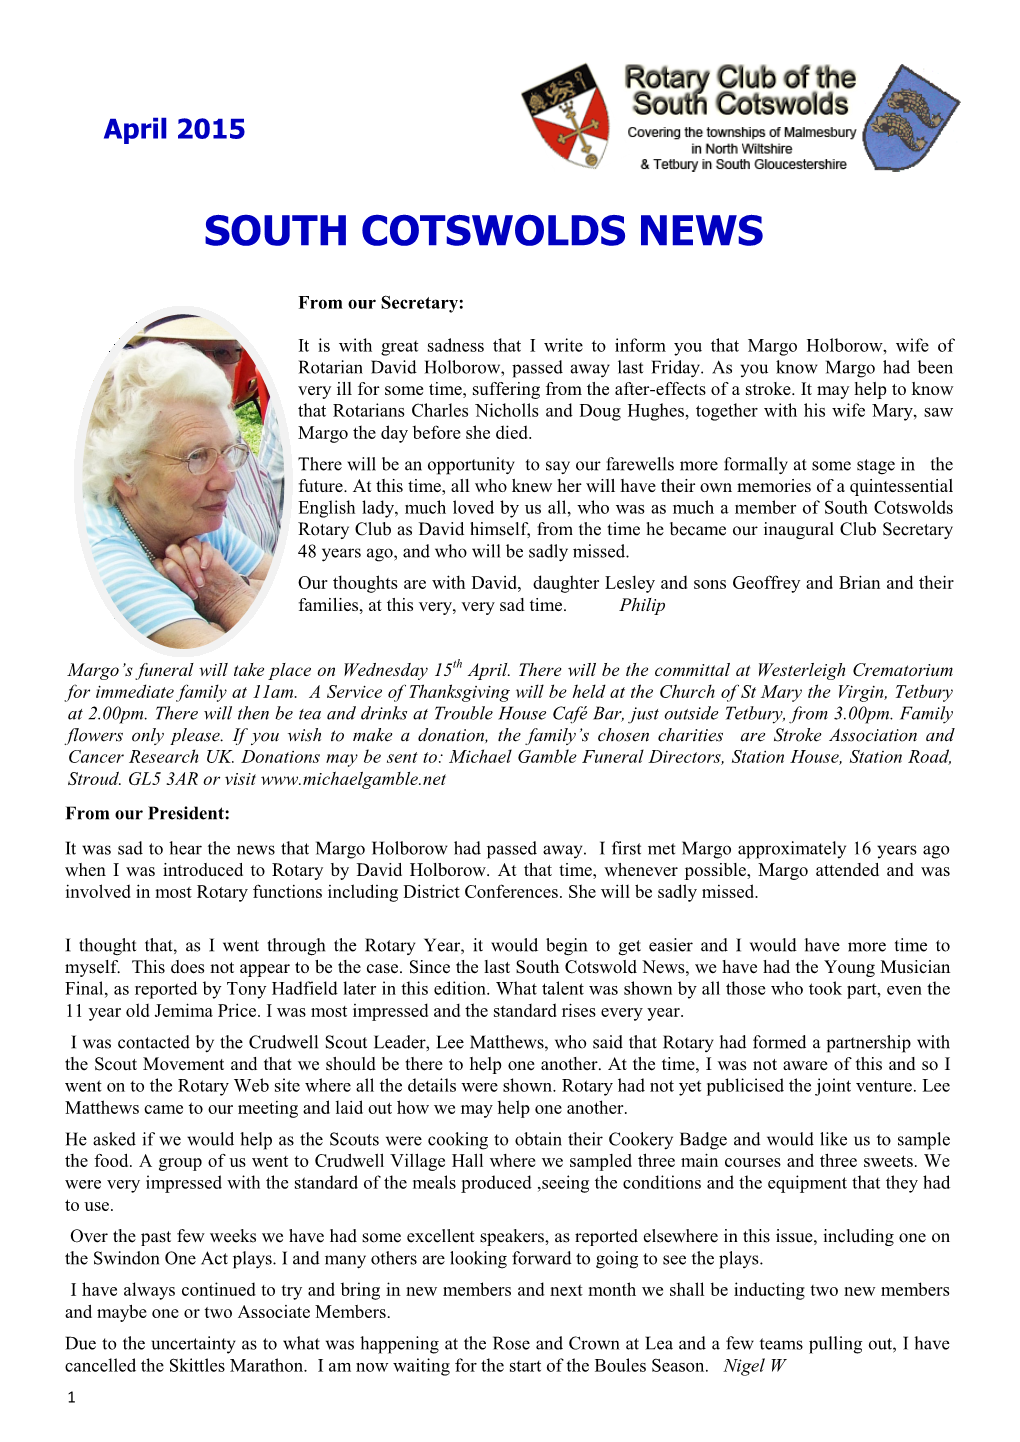 South Cotswolds News